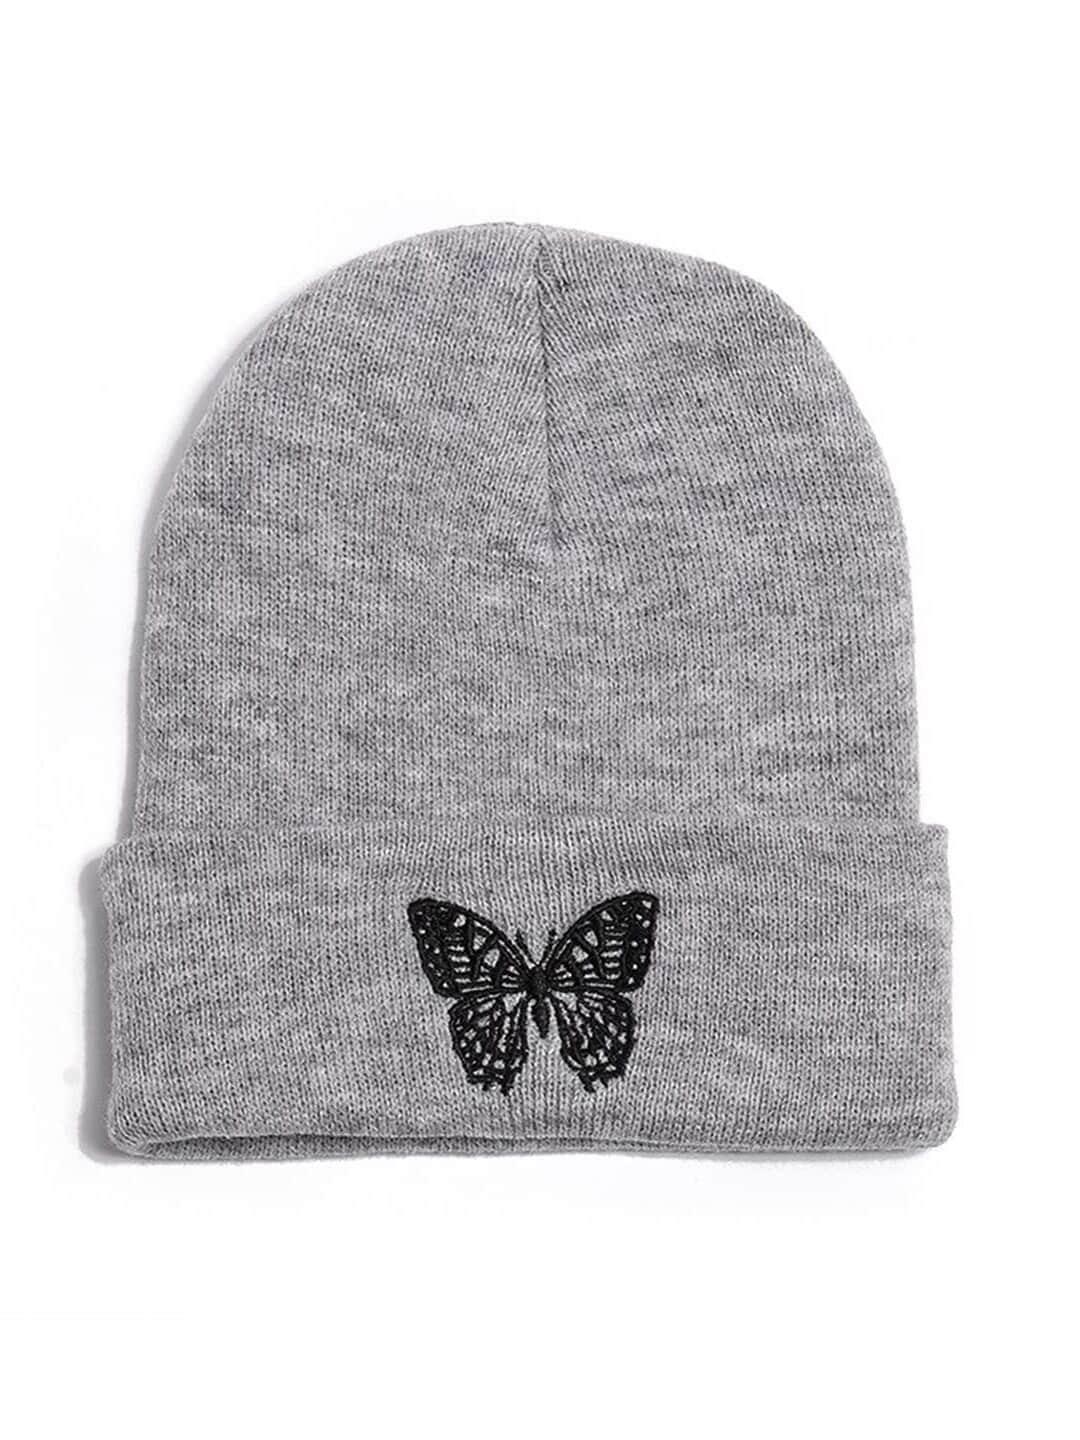 youstylo adults grey & black embroidered woolen winter beanie cap